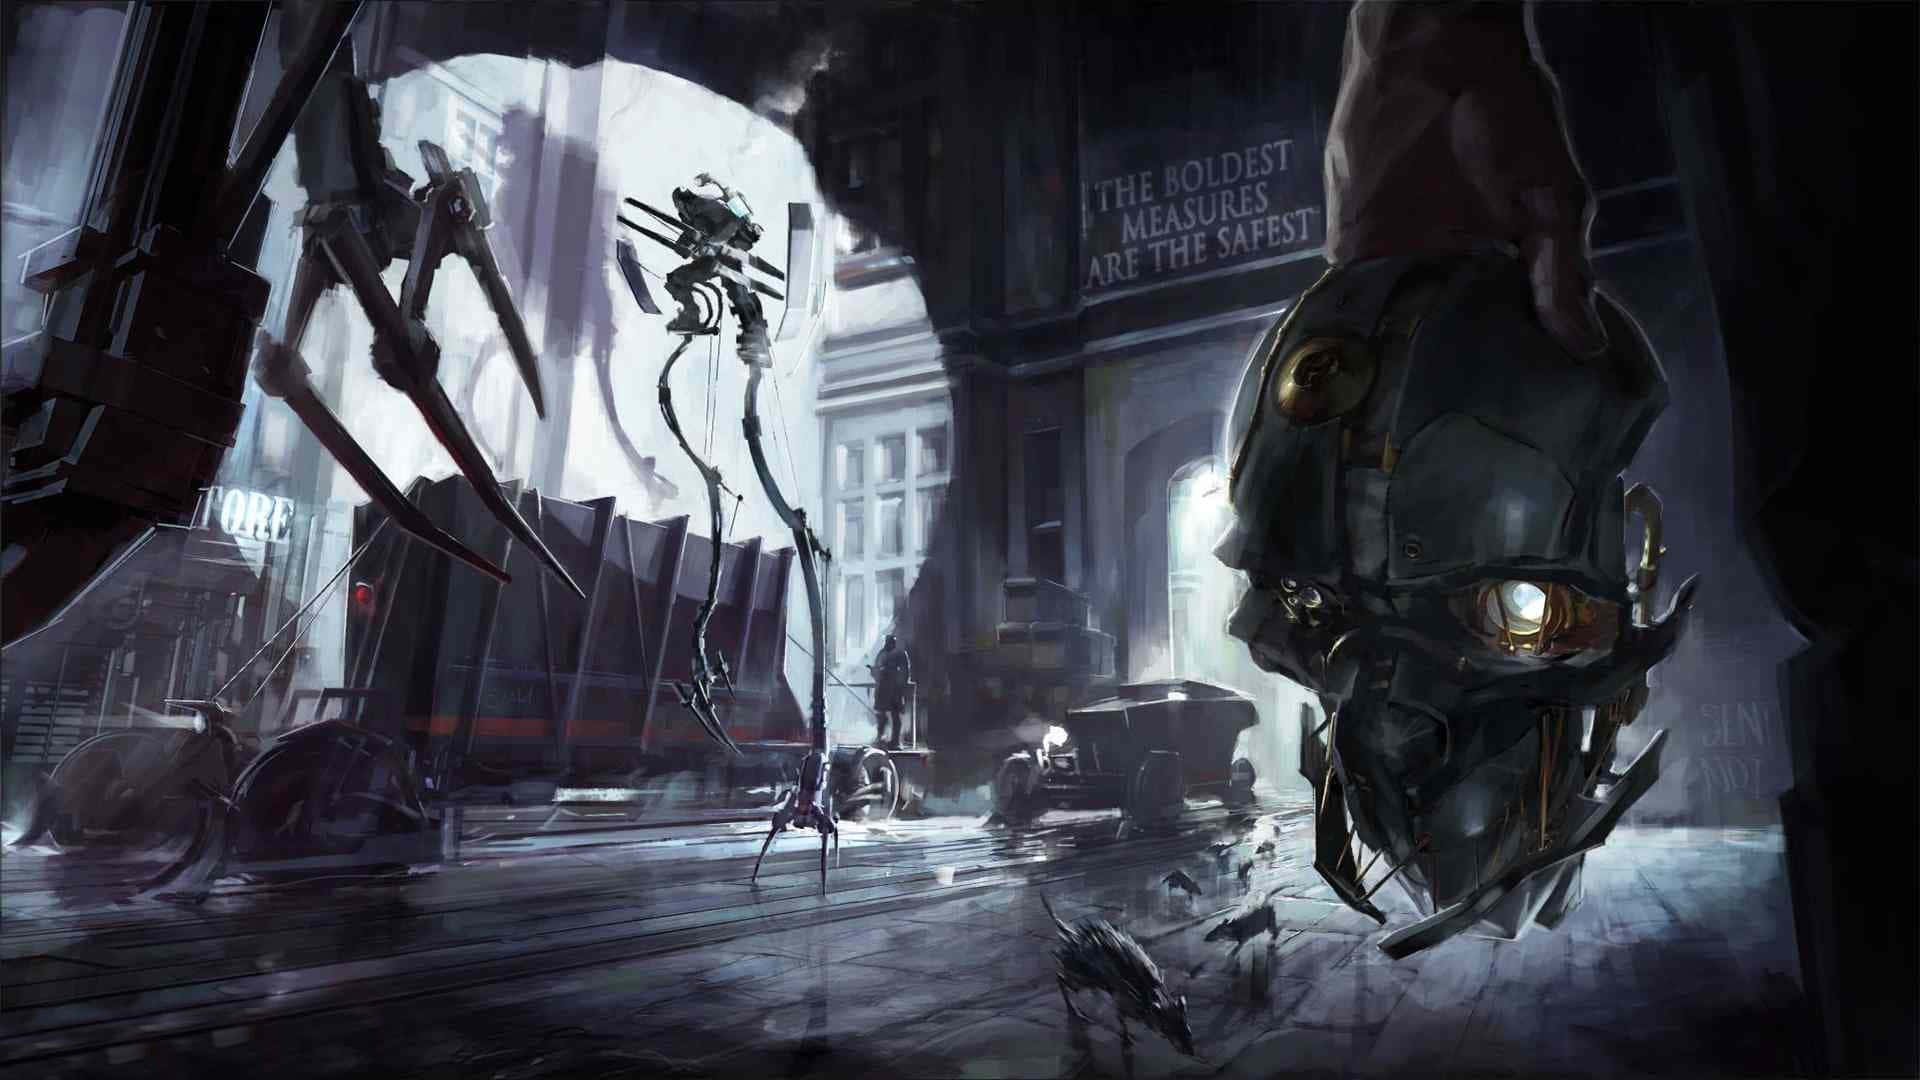 Embark on an Adventure of Revenge with Dishonored 2